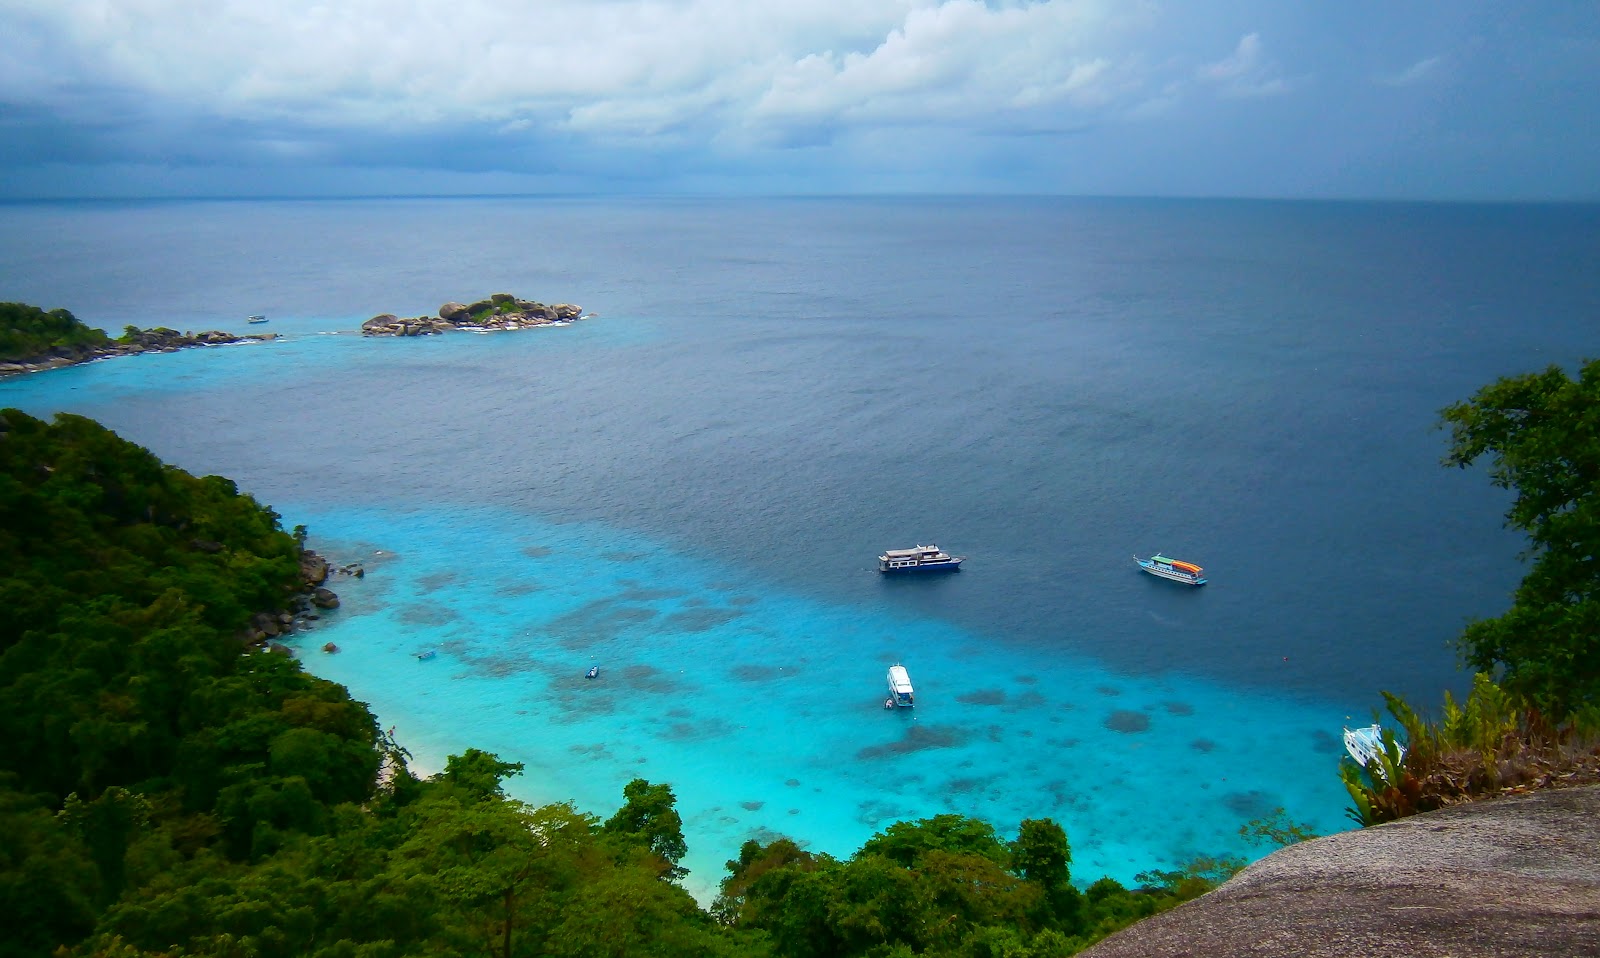 Tezza's Beaches and Islands: Similan Islands